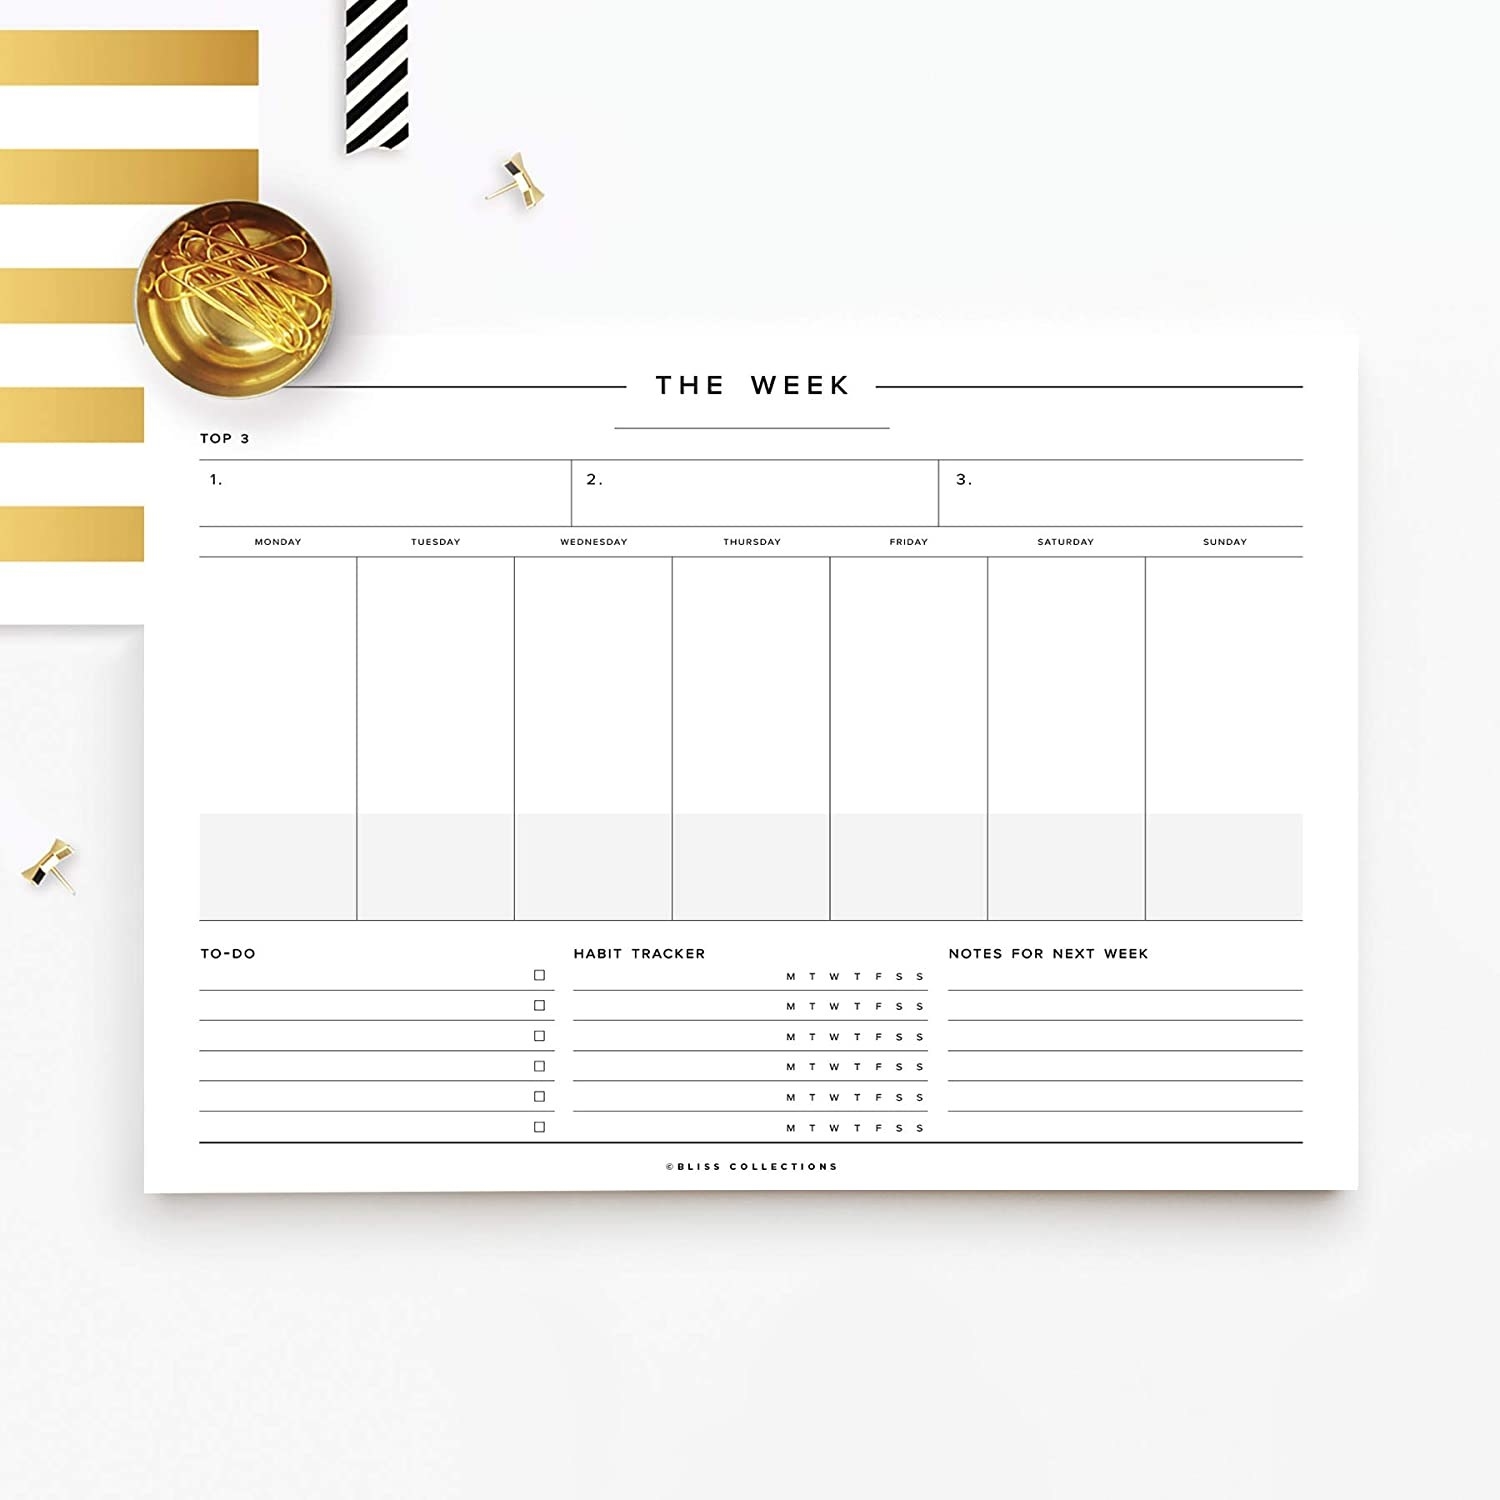 A black and white page with slots for each day, a to-do list, notes, and habit tracking